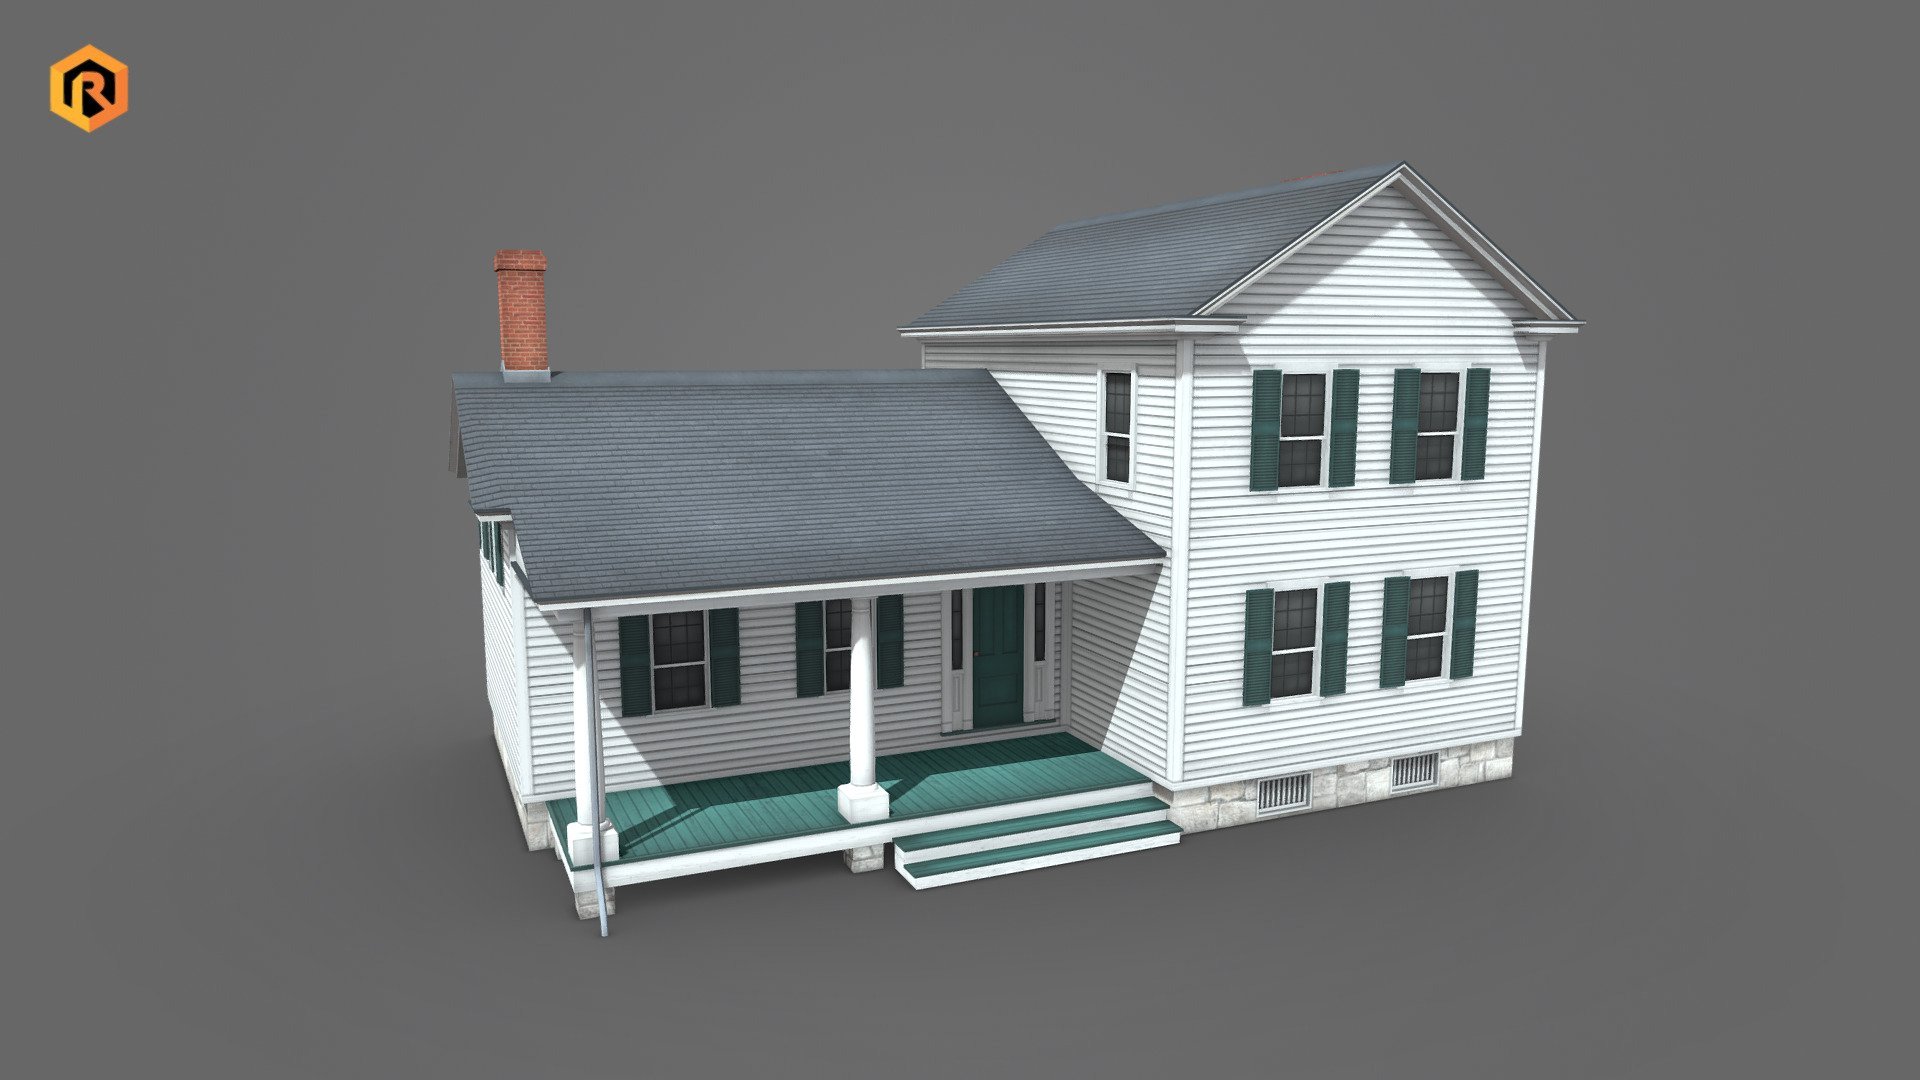 Low-poly 3D model of white, wooden house building. 
It is best for use in games and other VR / AR, real-time applications such as Unity or Unreal Engine.  It can also be rendered in Blender (ex Cycles) or Vray as the model is equipped with detailed textures.  

You can also get this model in a bundle: https://skfb.ly/owqyZ

Technical details:




4096 x 4096 Diffuse and AO texture set

2688 Triangles

1696 Vertices

Model is one mesh.

Model completely unwrapped.

Model is fully textured with all materials applied. 

Pivot point centered at world origin.

Model scaled to approximate real world size (centimeters).

All nodes, materials and textures are appropriately named.

Lot of additional file formats included (Blender, Unity, Maya etc.) 

More file formats are available in additional zip file on product page.

Please feel free to contact me if you have any questions or need any support for this asset.

Support e-mail: support@rescue3d.com - White Wooden Building - Buy Royalty Free 3D model by Rescue3D Assets (@rescue3d) 3d model